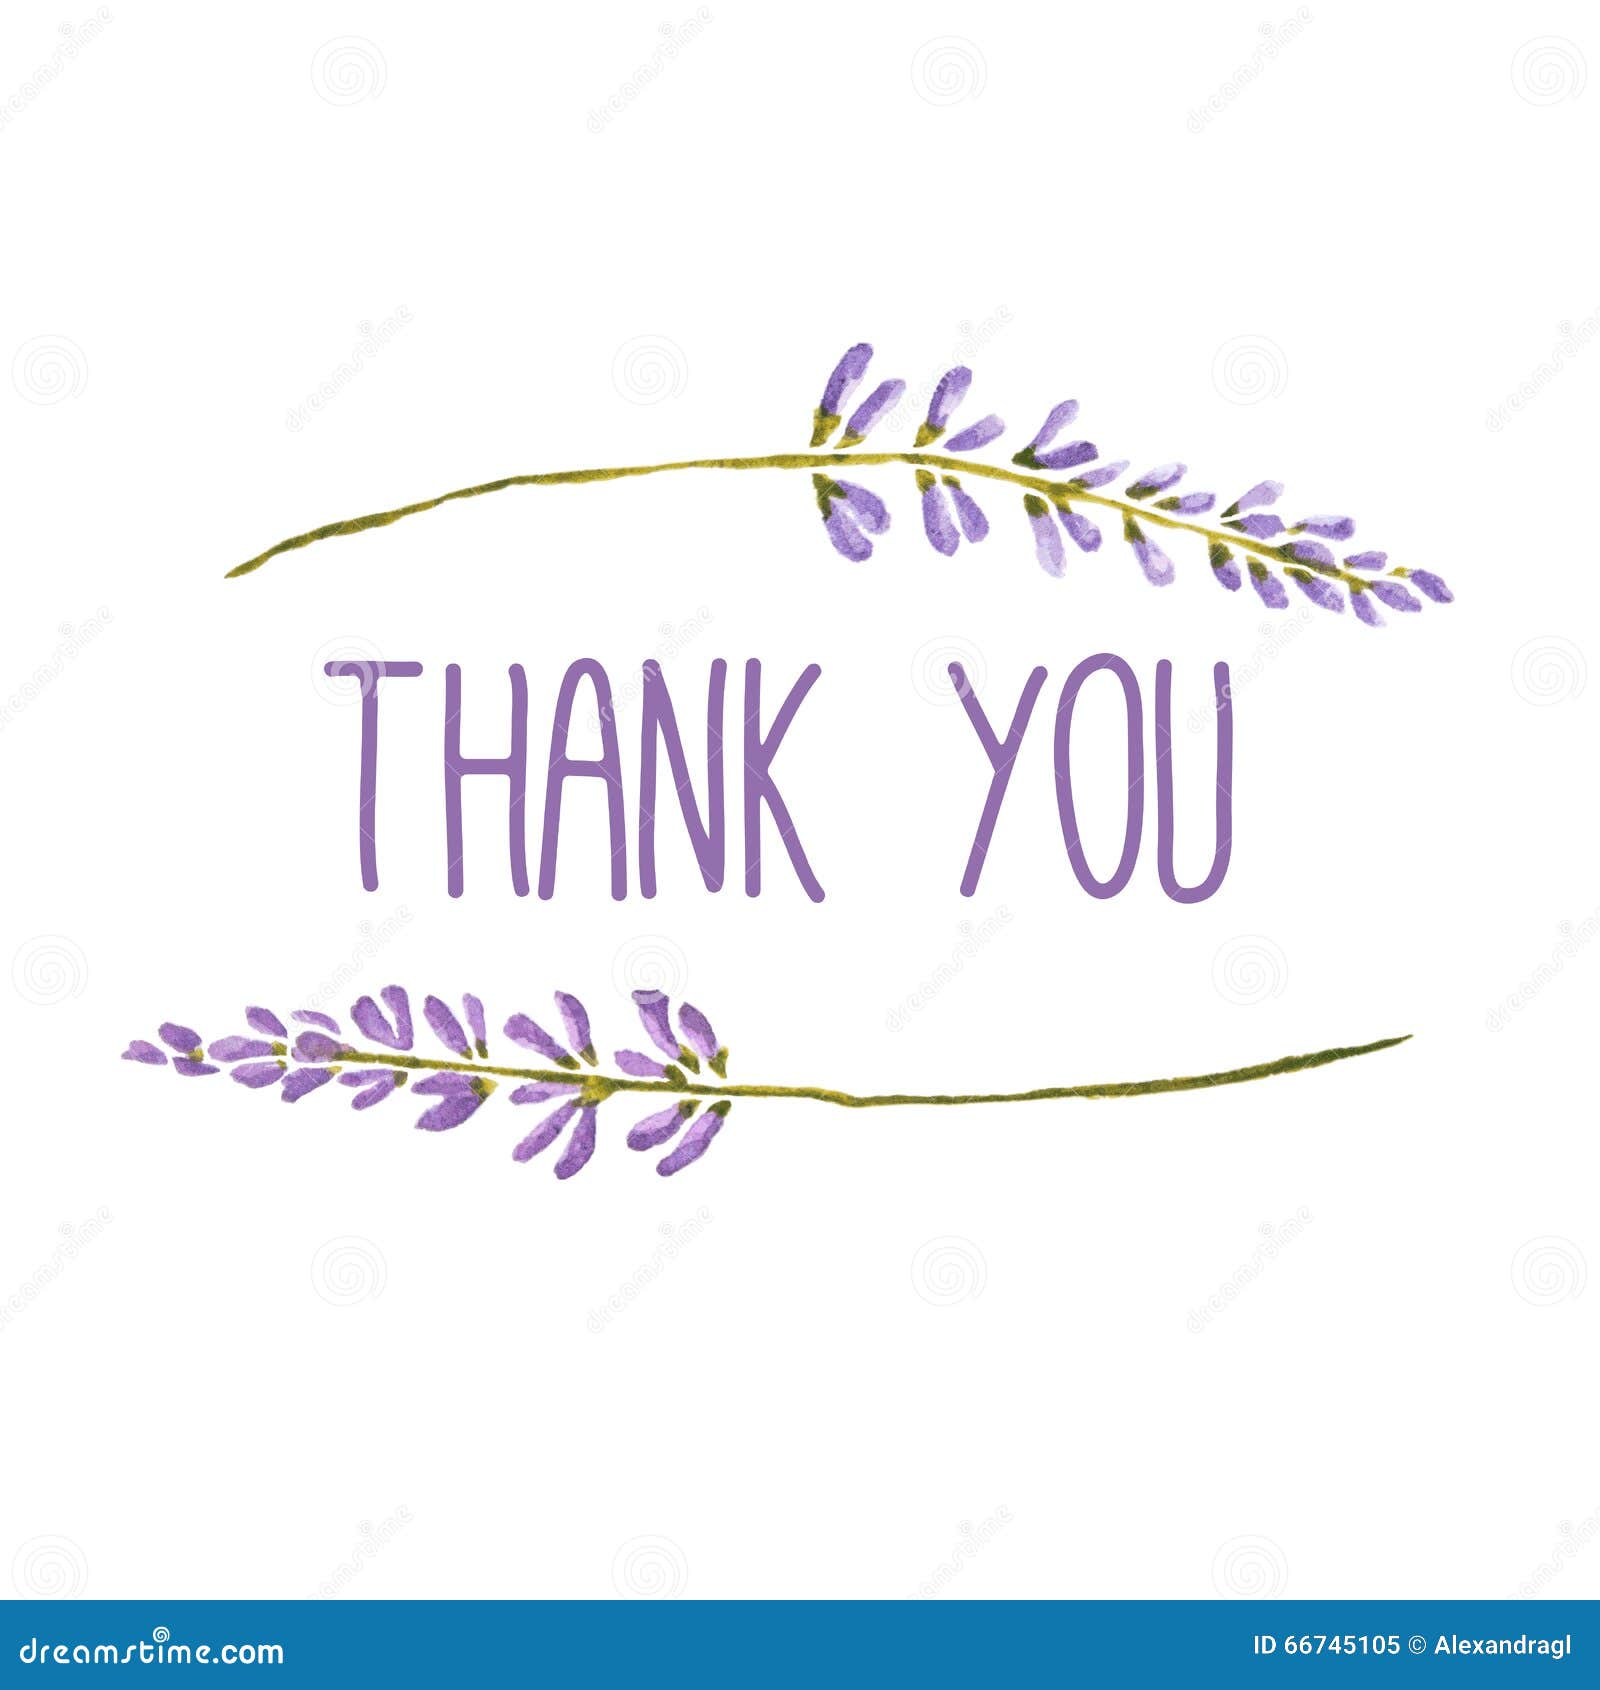 vector free download thank you - photo #42